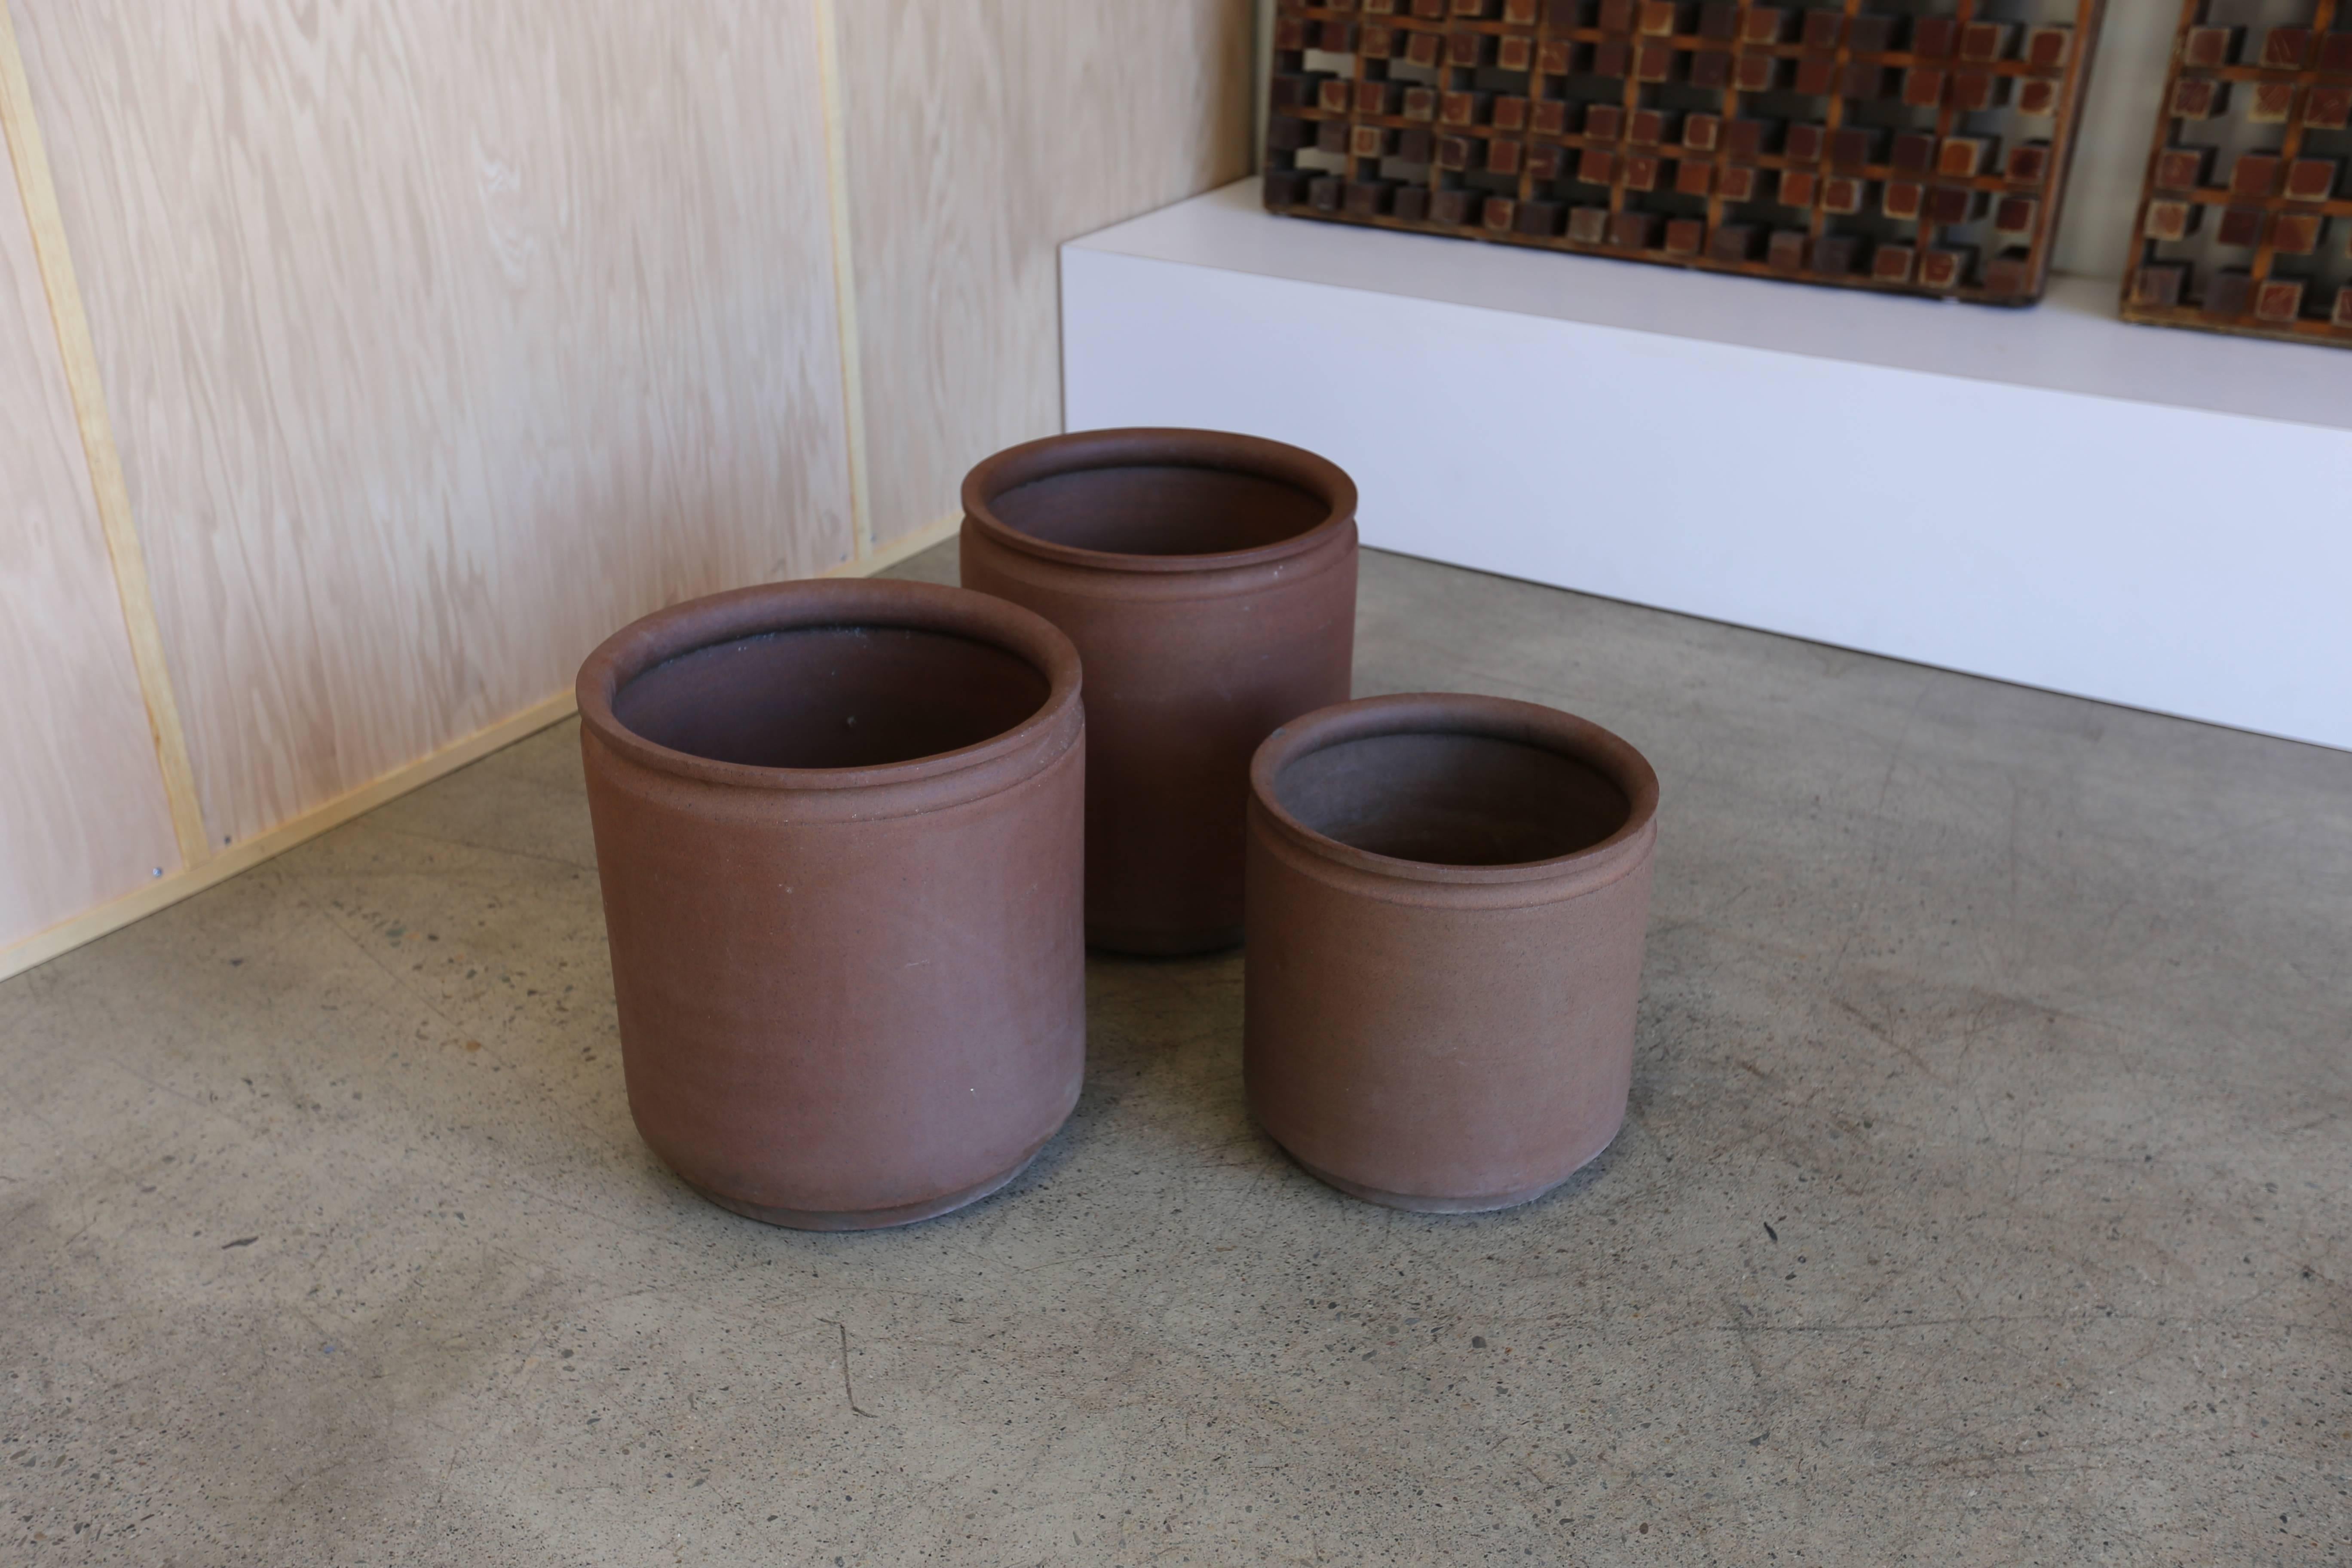 Group of Three Ceramic Planters by David Cressey and Robert Maxwell 1